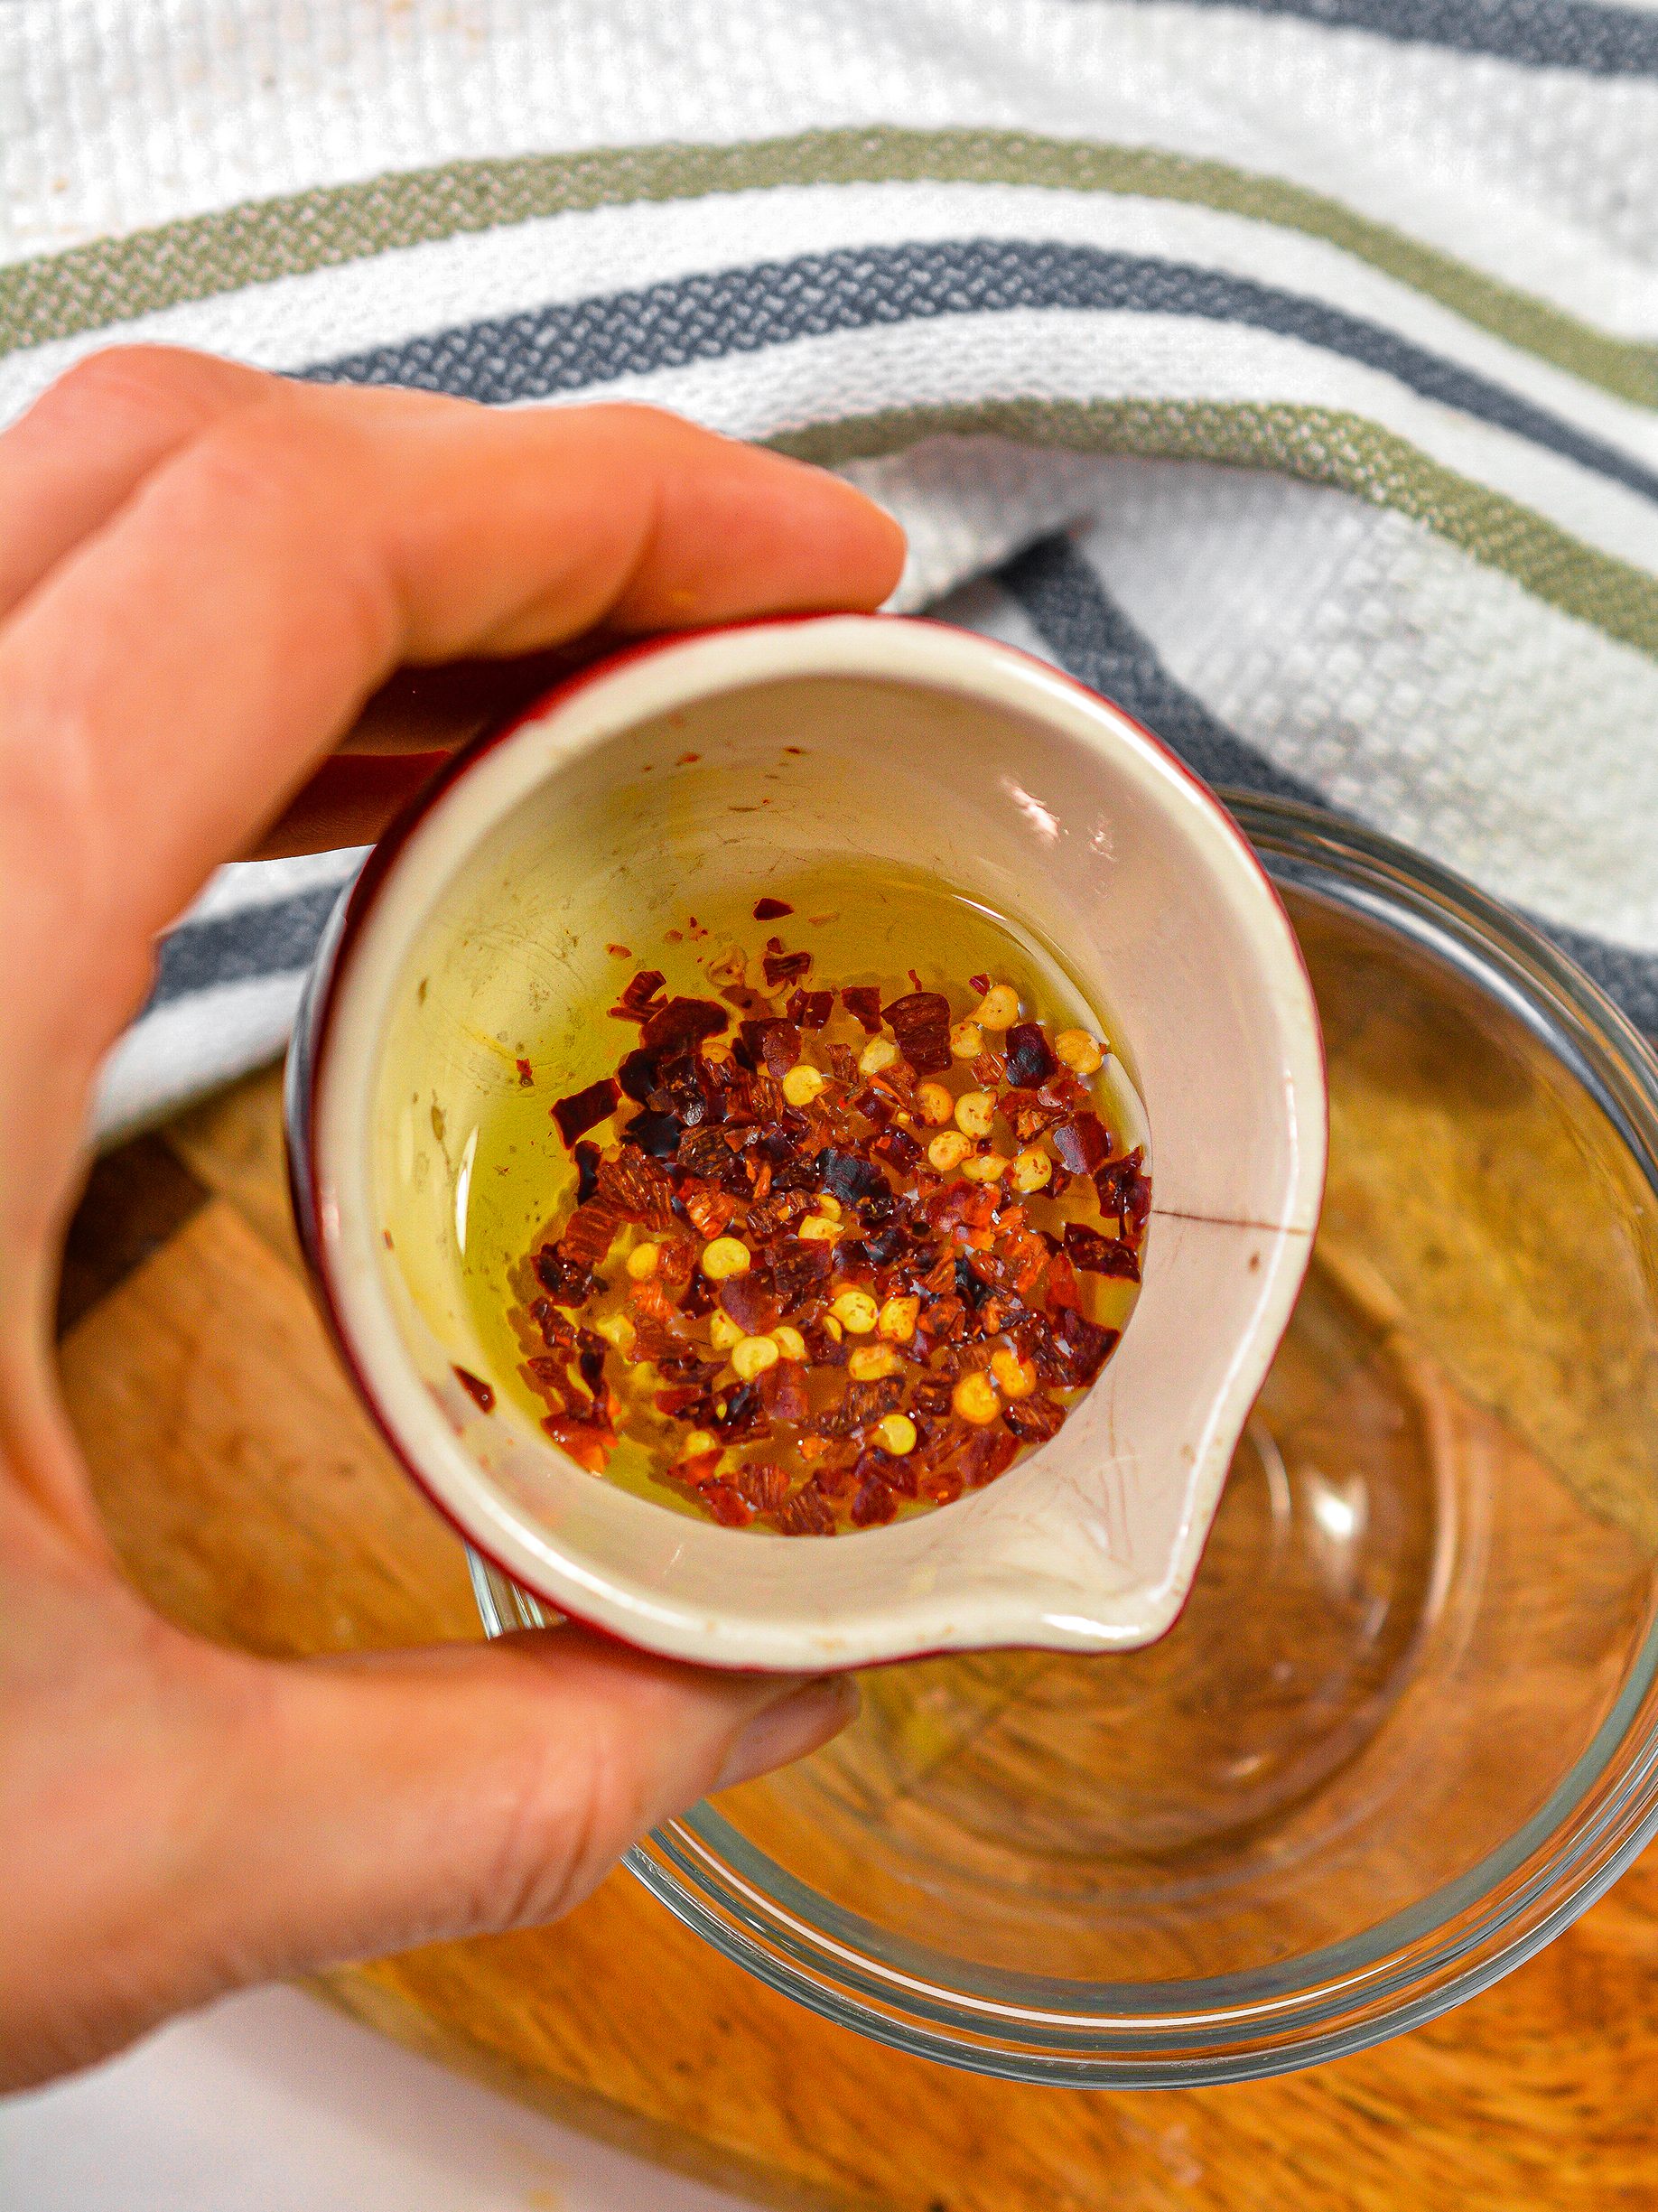 In a bowl, combine the chili oil, oyster sauce, honey and pepper to taste.